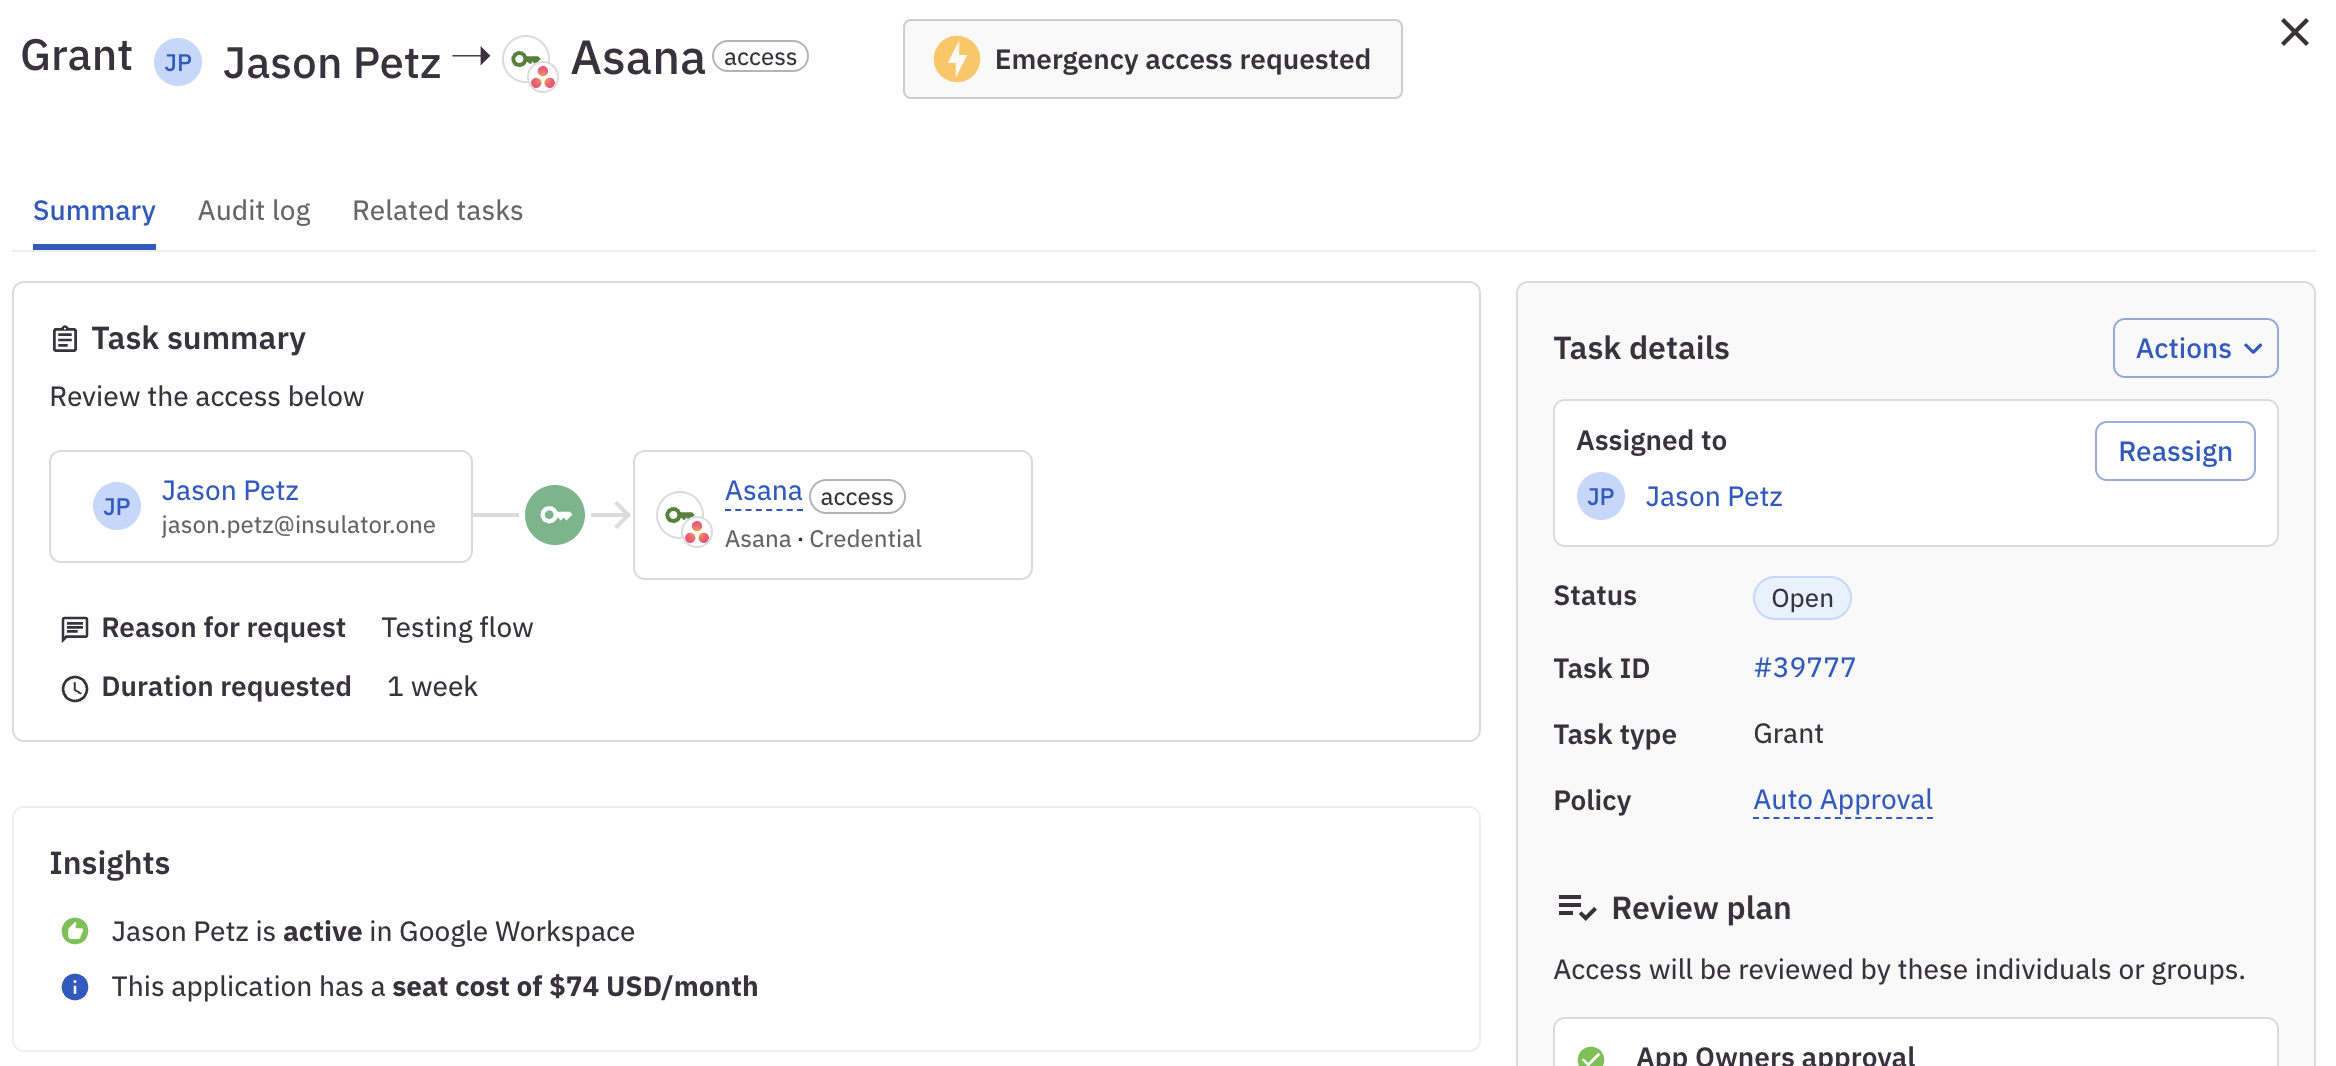 A task details page showing the 'Emergency access requested' badge in the header.